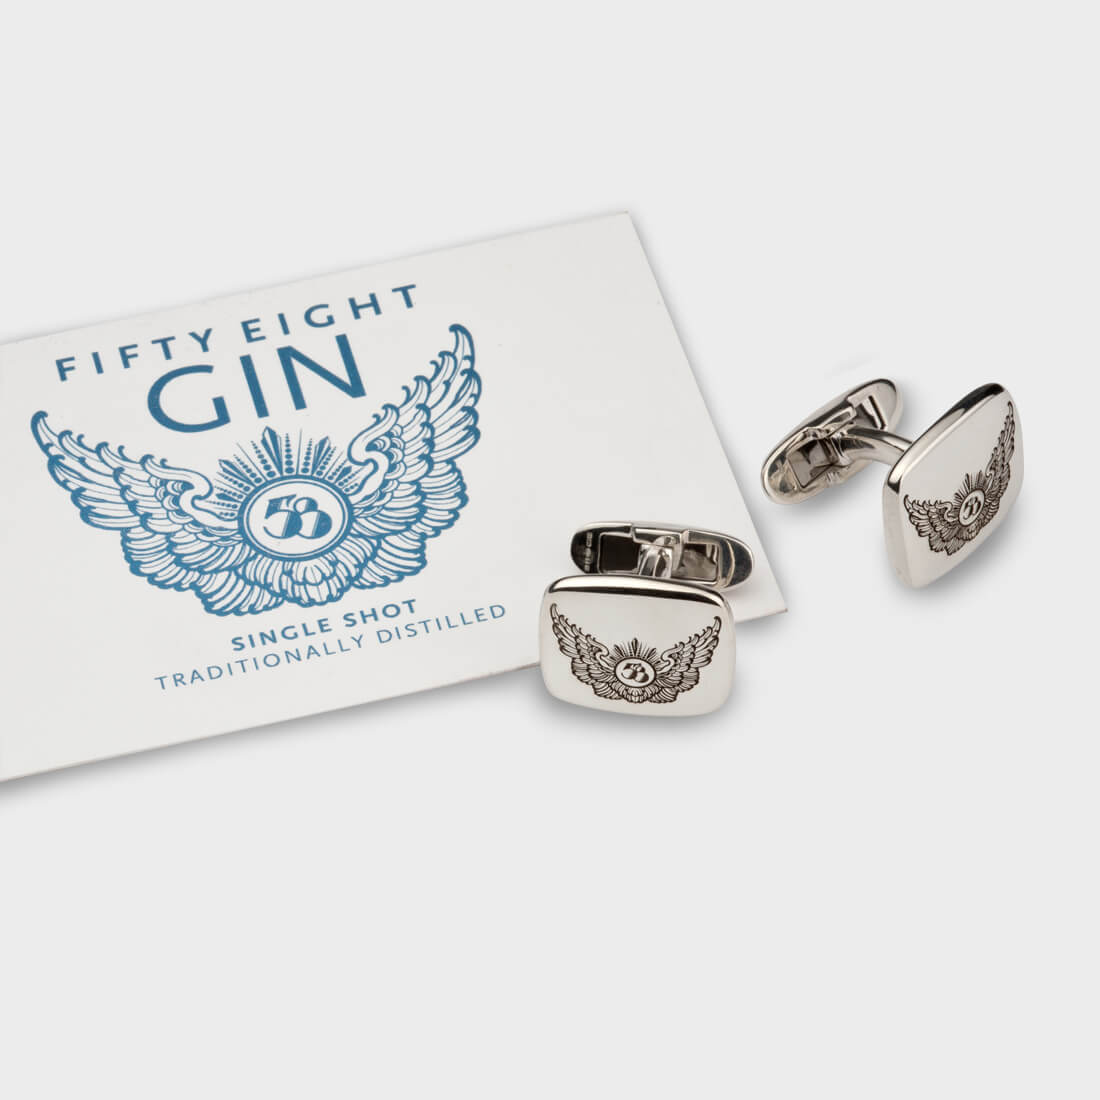 Sterling silver signet cufflinks with Fifty Eight Gin's wings logo engraved on it, next to a business card of Fifty Eight Gin brand